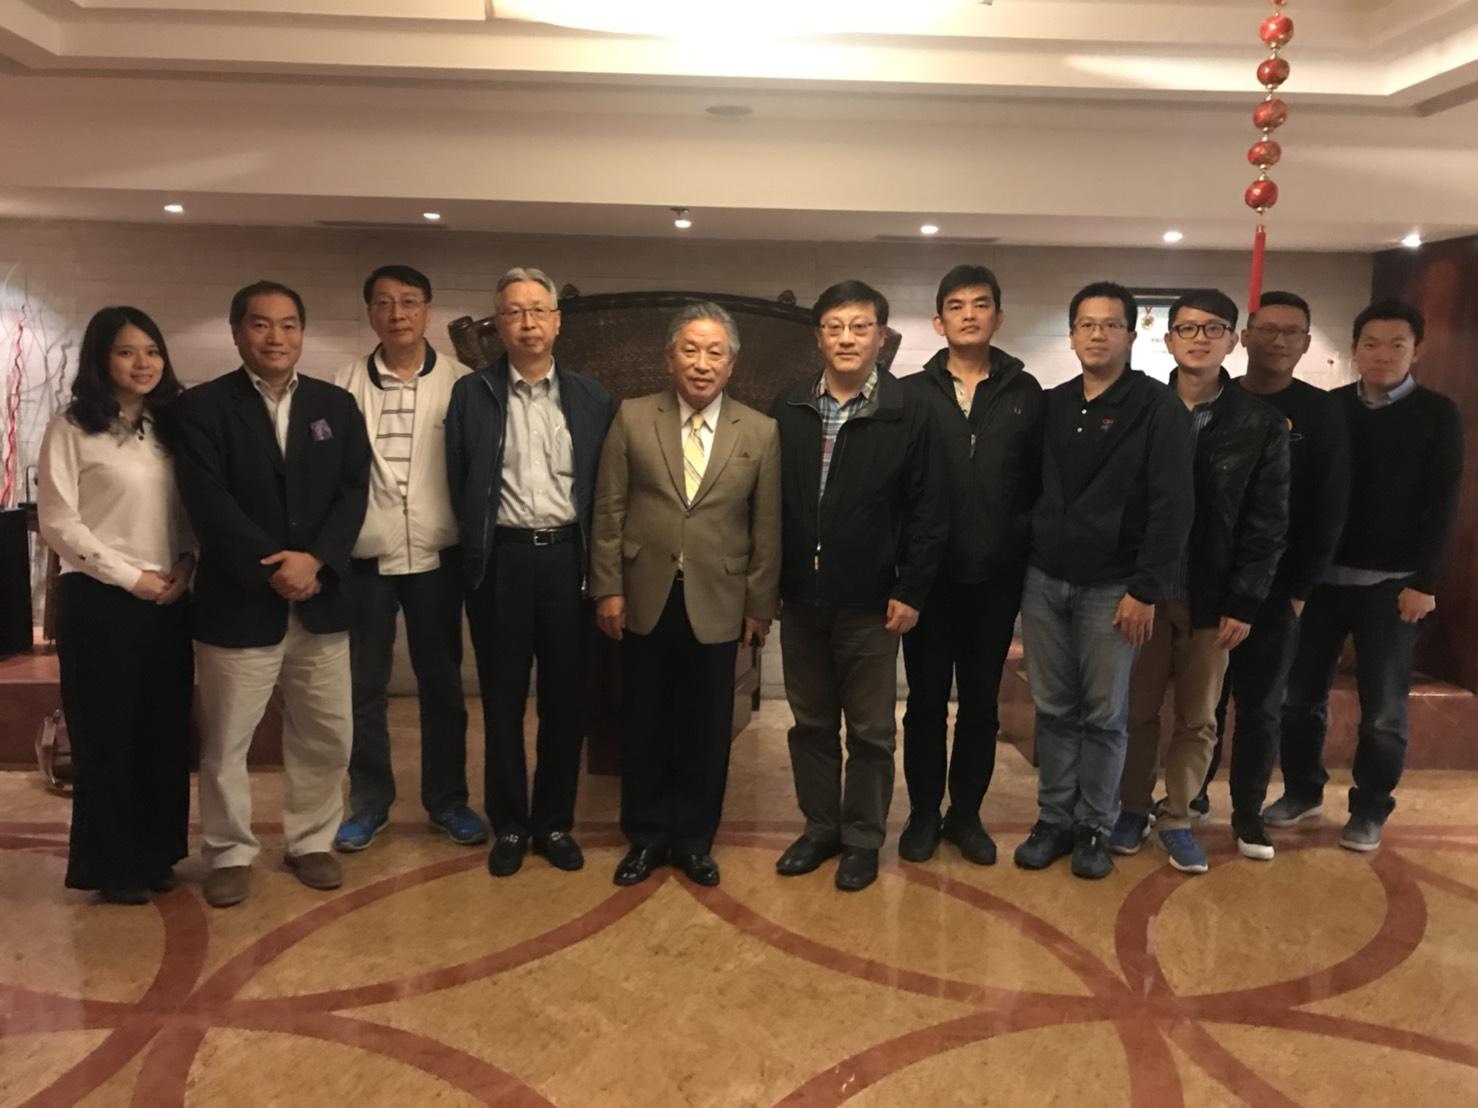 1.Delegations from Green Energy Industries in Taiwan, led by Dr. Chunto Tso, Director of Research Division I of Taiwan Institute of Economic Research(TIER), visited India from 19th to 24th November 2017 to promote Taiwan green energy products and technologies. The delegation paid a courtesy call to Amb. Tien of Taipei Economic and Cultural Center in India(TECC) on the 19th of November. The delegation visited several green energy companies in New Delhi and Bengaluru to exchange views on future possible cooperation.
2.Amb. Tien(Left 5), Director Chen(Left 2) met the delegation led by Dr. Tso(Left3).